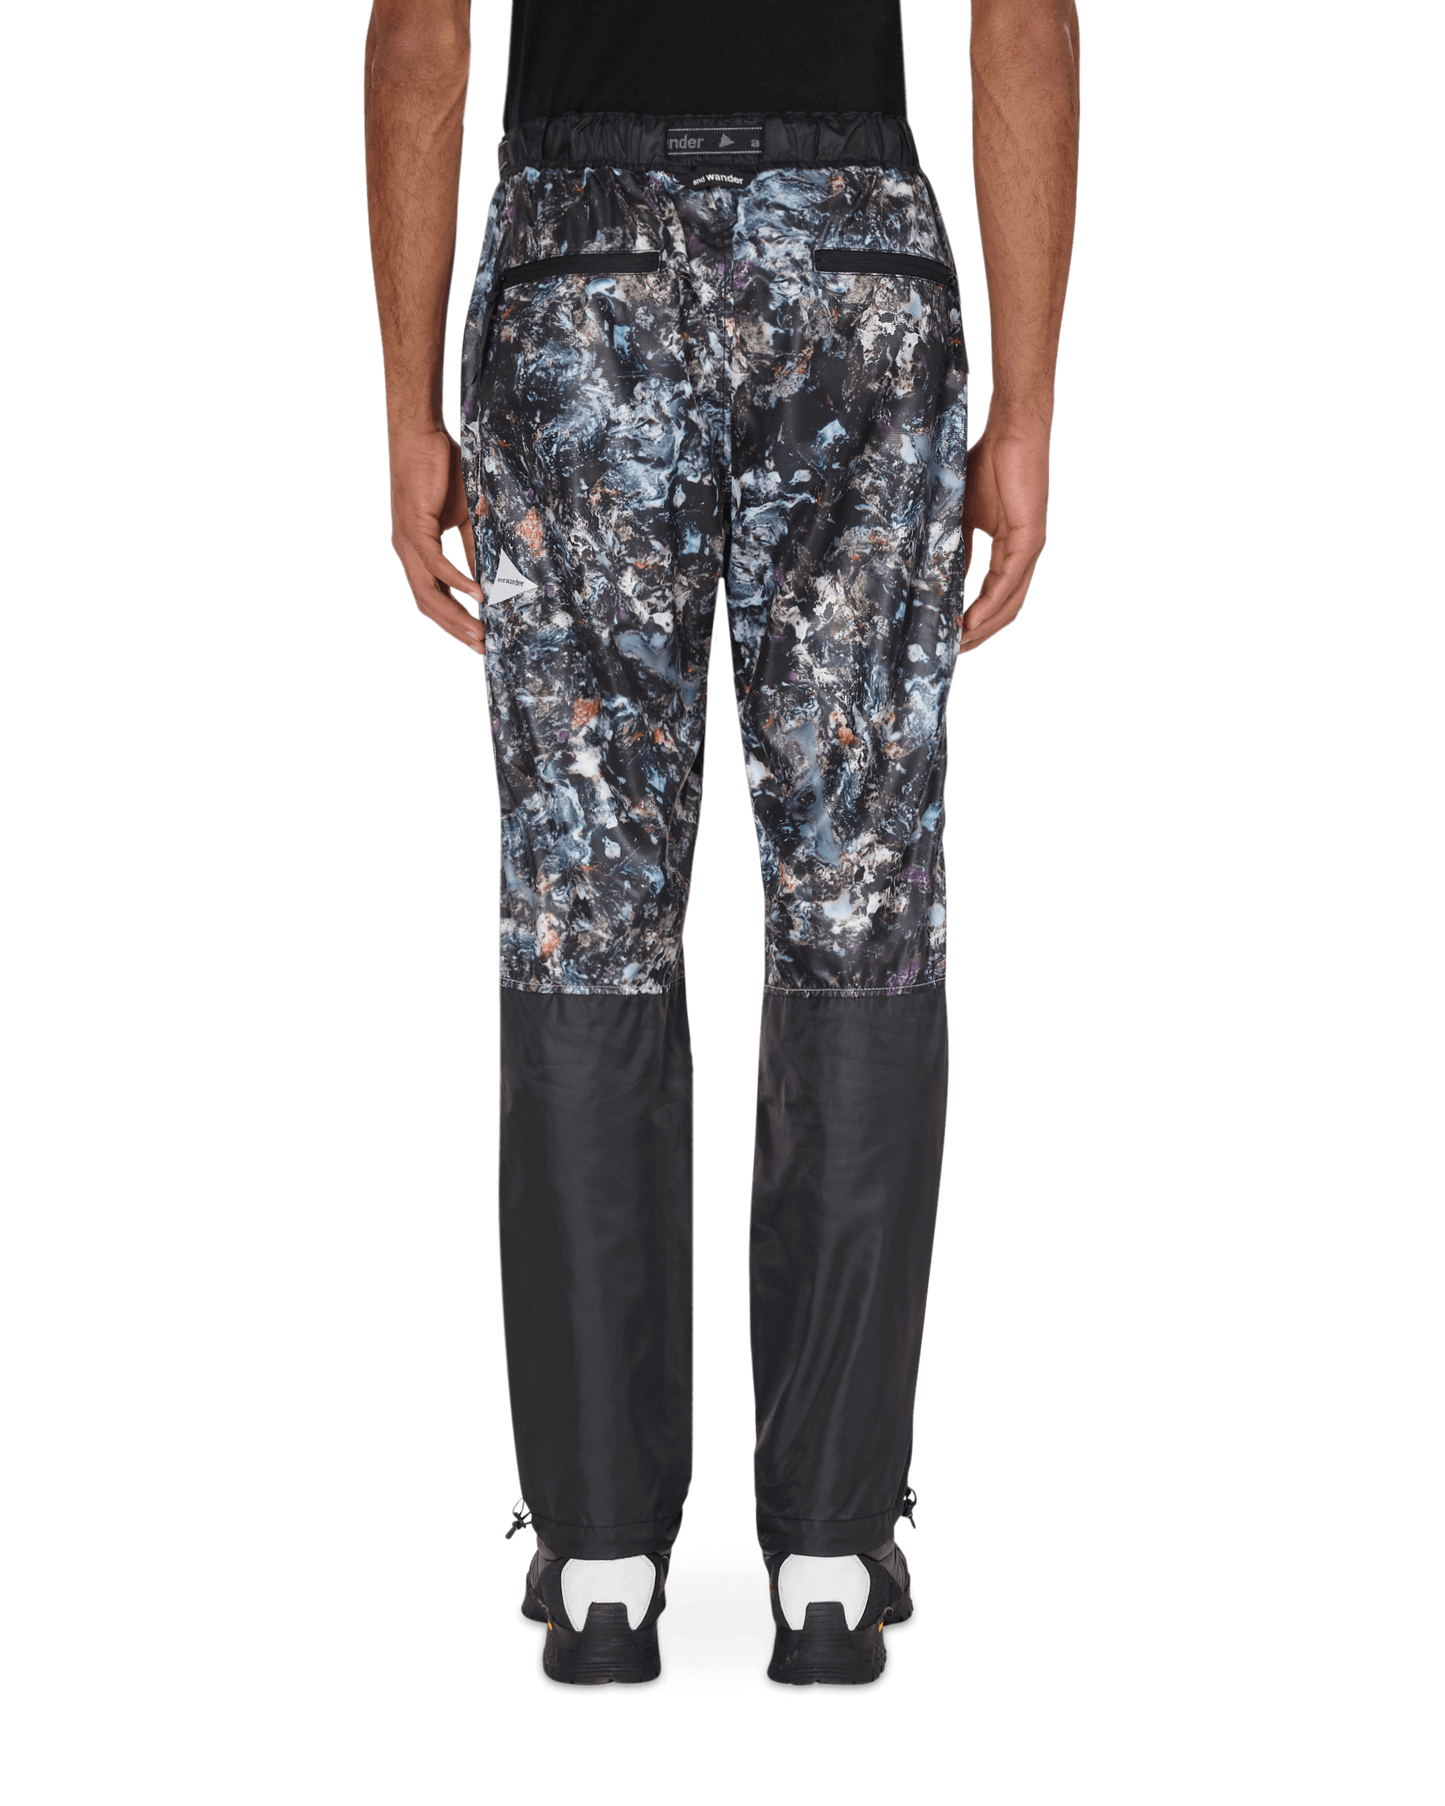 And Wander Stone Printed Rip Black Pants Trousers 5740222009 010